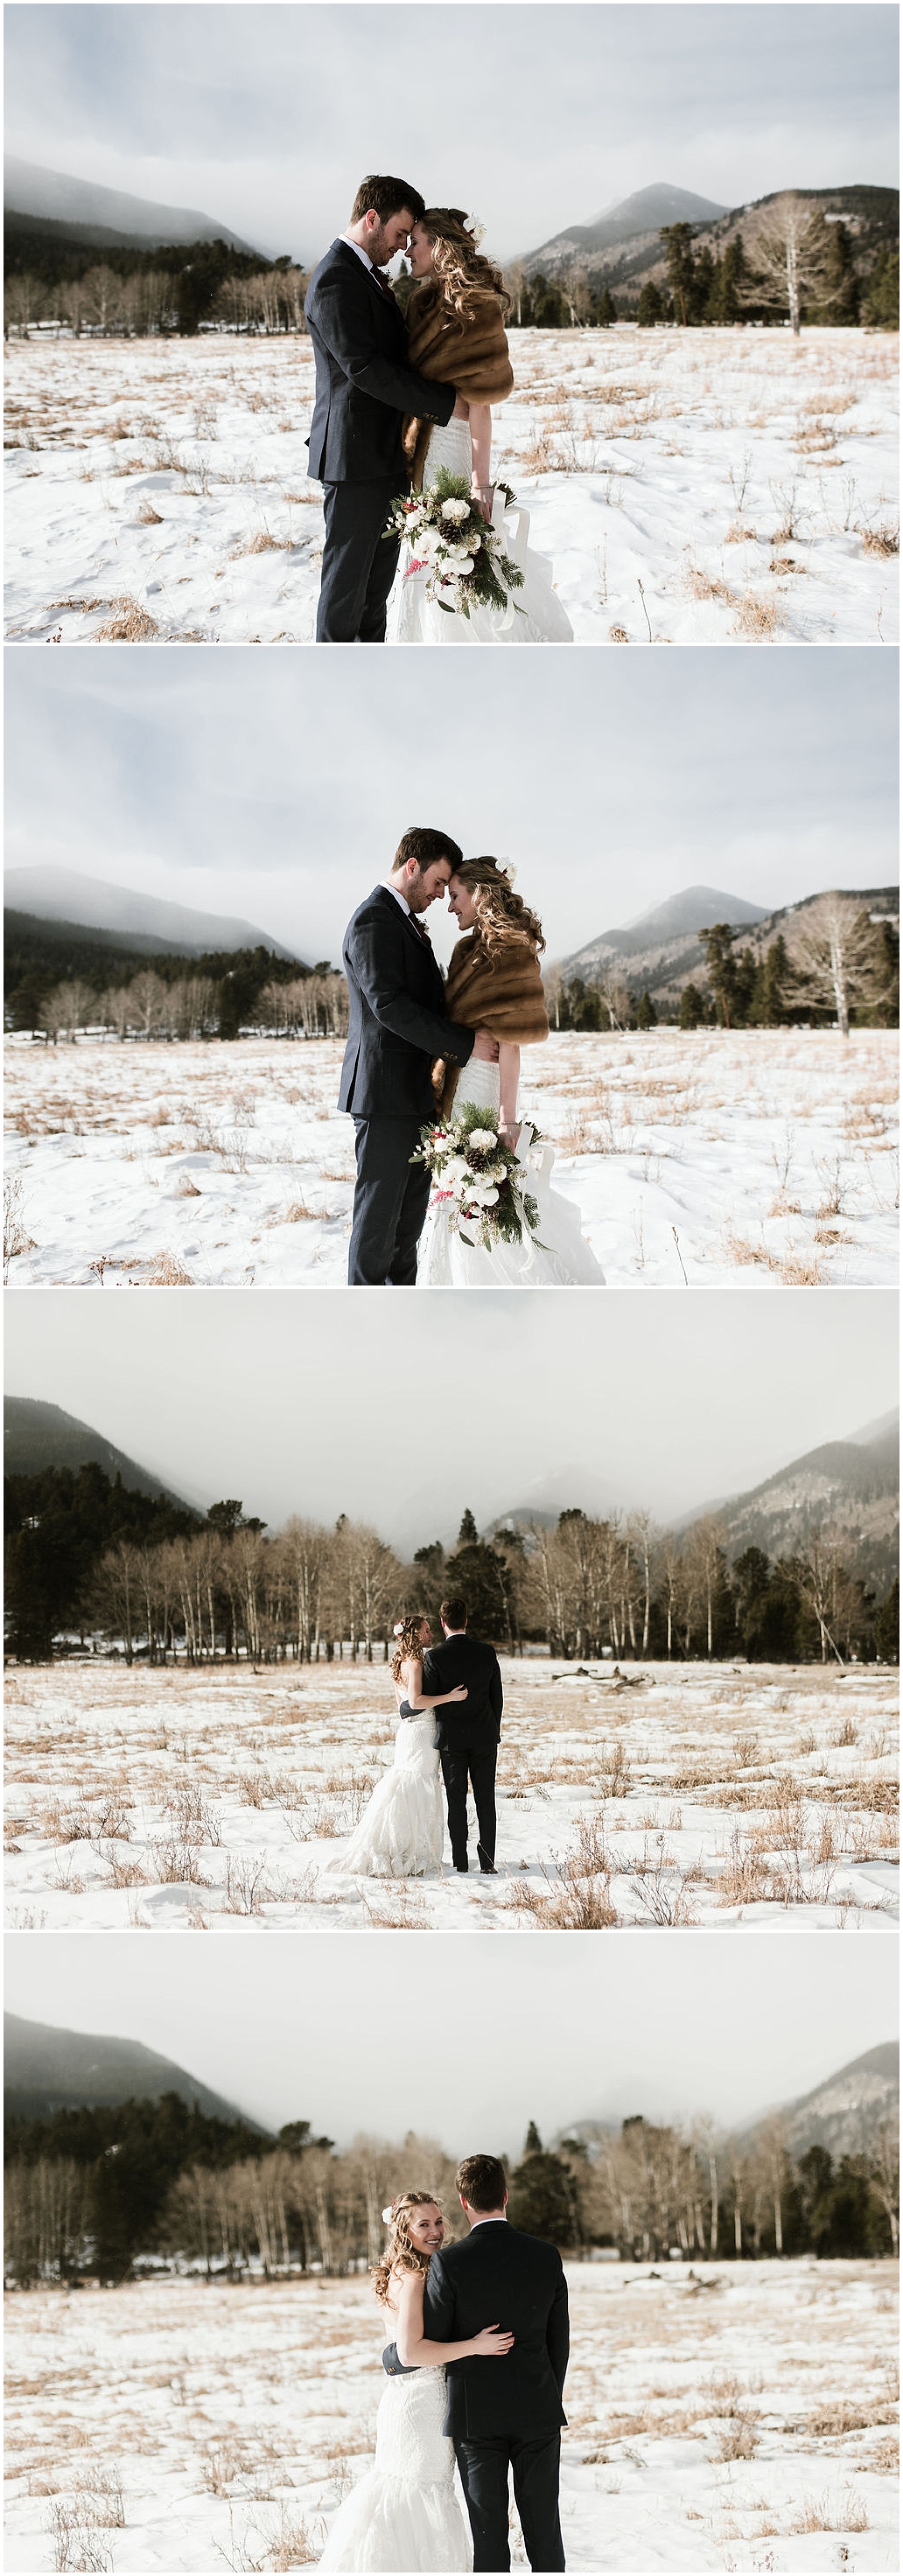 Katesalleyphotography-129_Haley and Dan get married in Estes Park.jpg